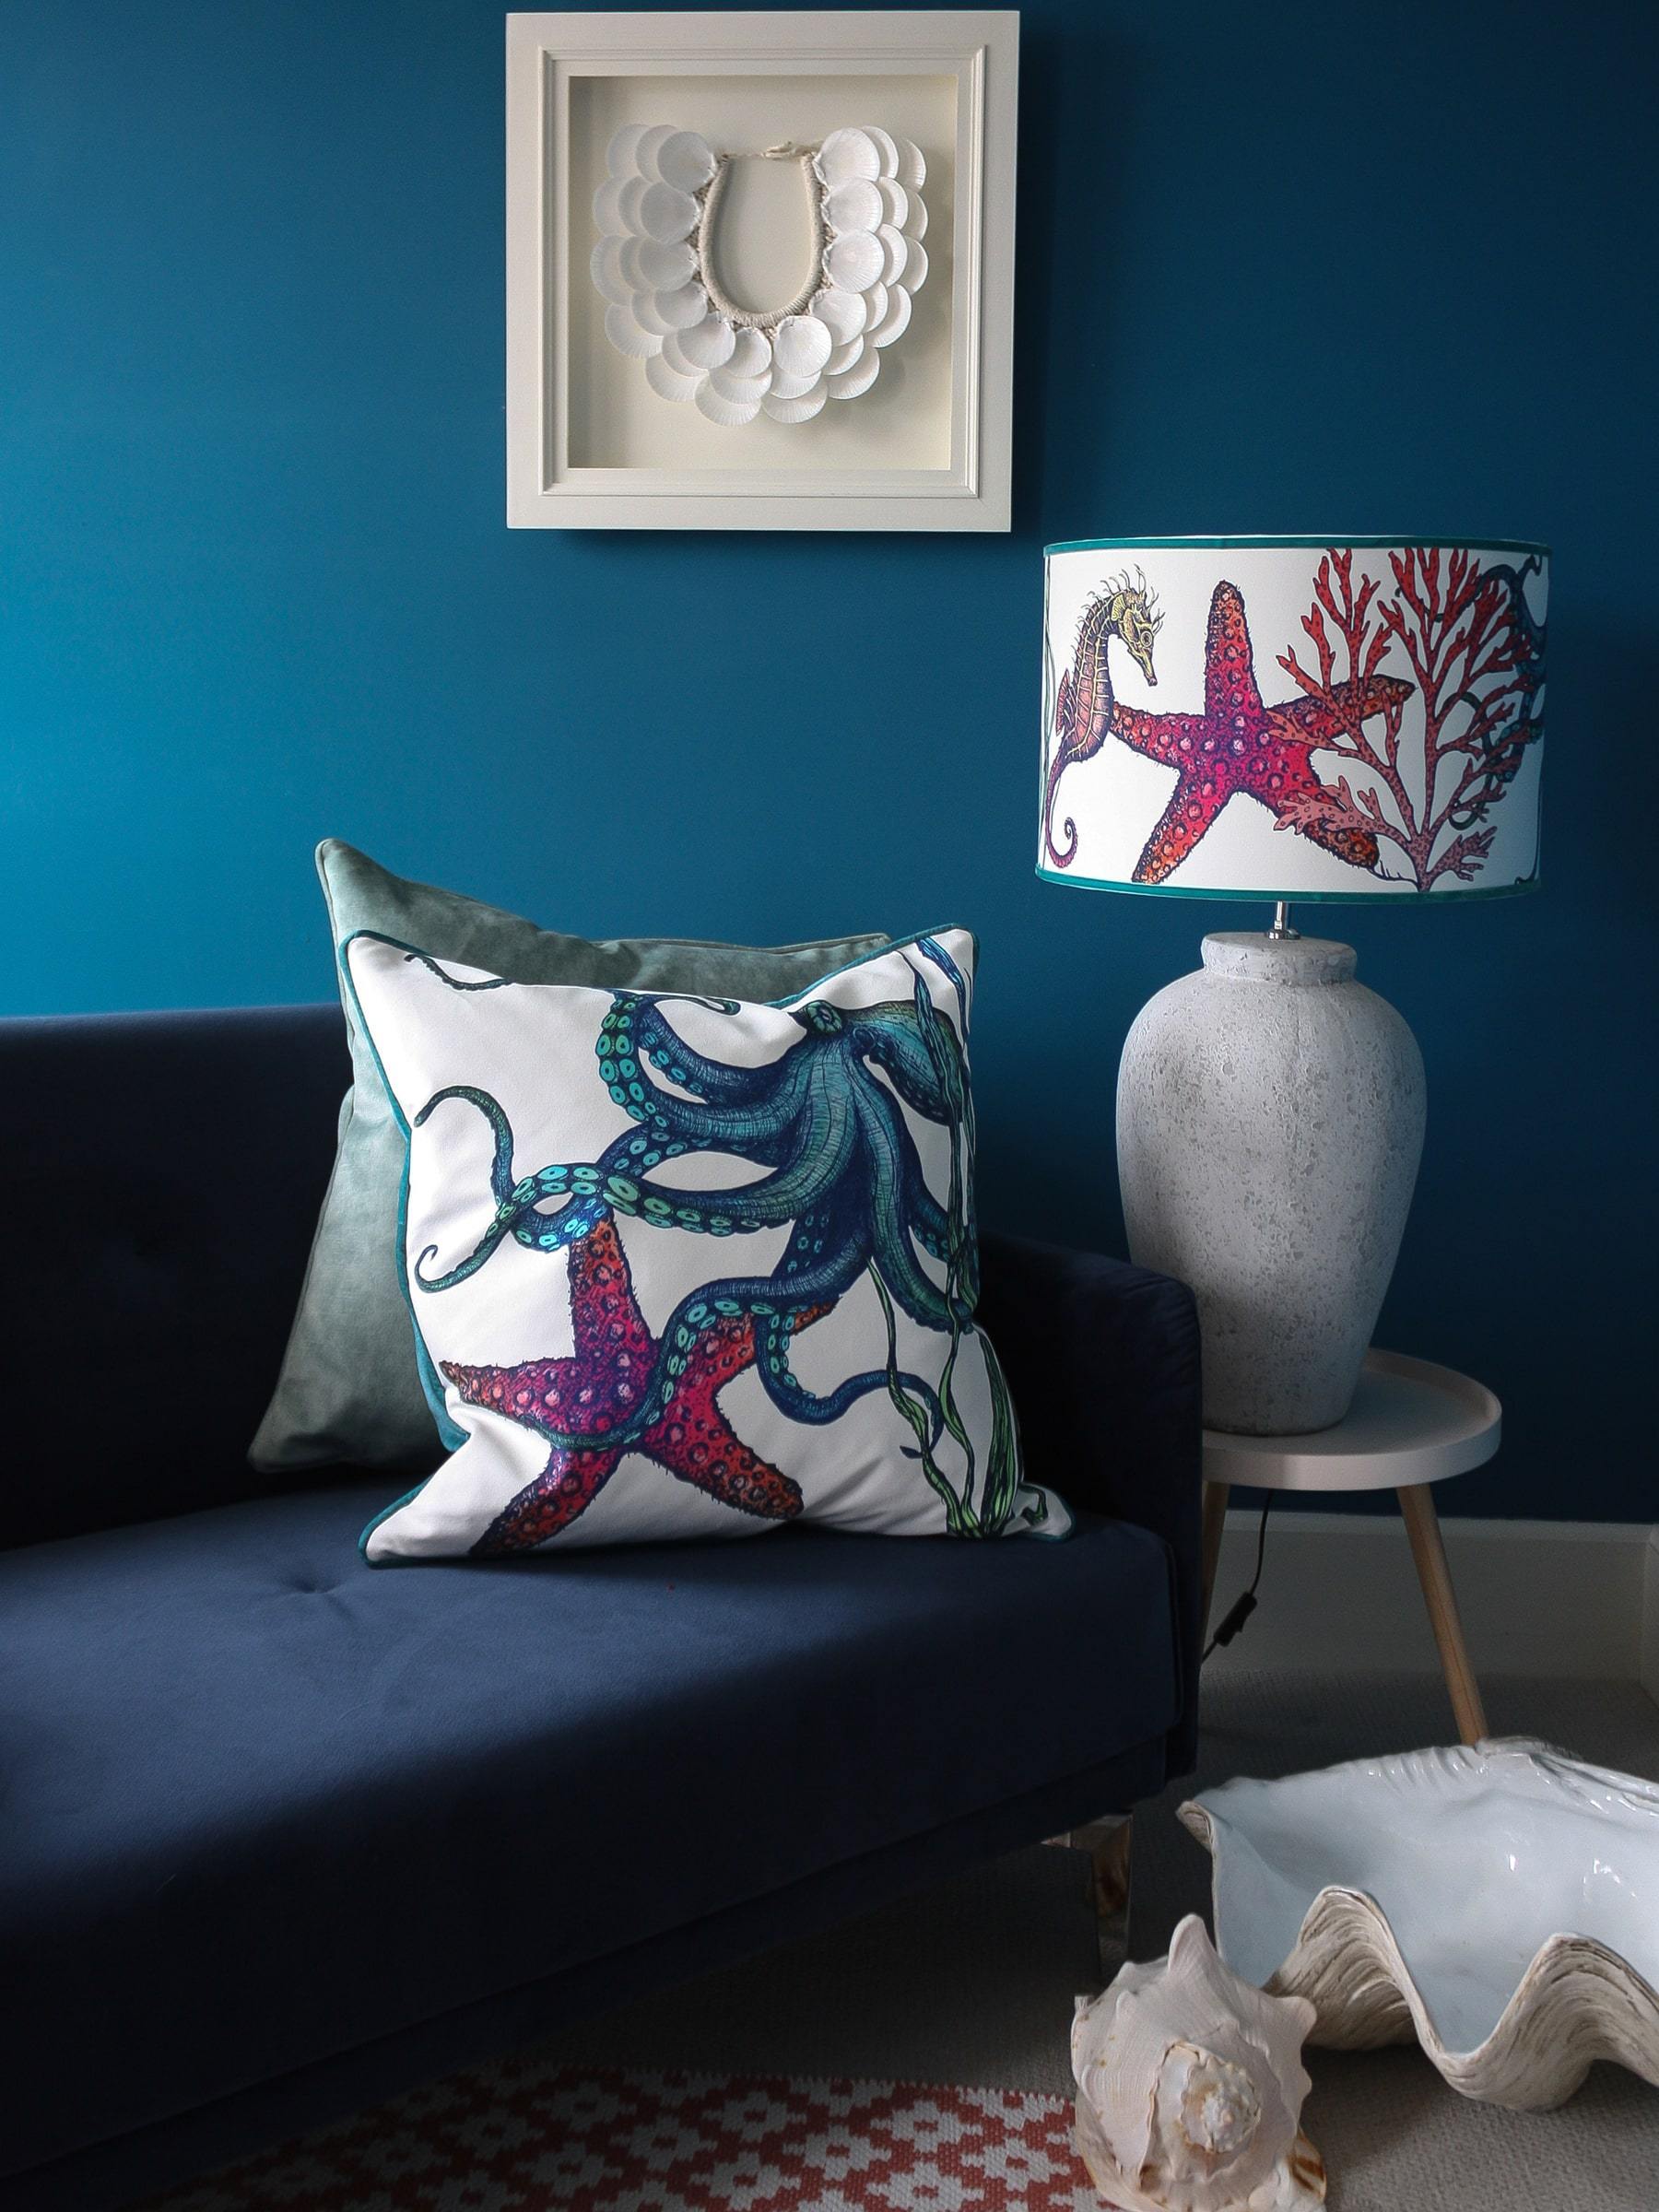 Rainbow Reef White Shade With Octopus,Seahorse,Starfish and Seaweed Design in bright colours on a white lampbase next to a navy sofa covered in our Reef cushions.Behind on the wall is a scallop art piece and in front of the sofa is a footstool and several shells on the floor.